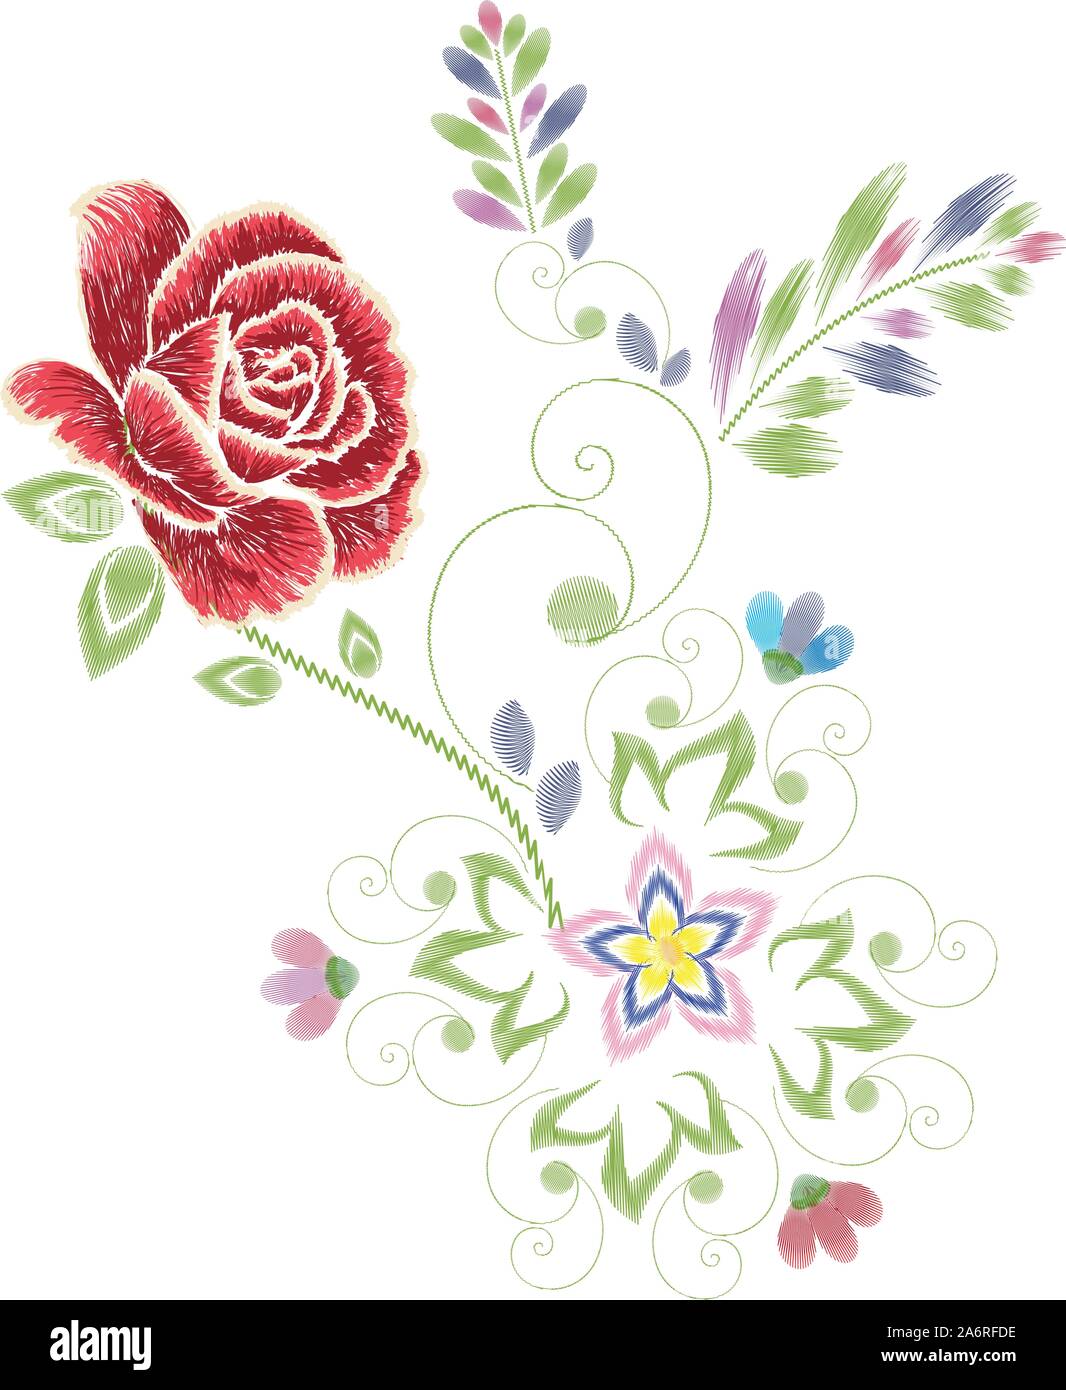 Decorative embroidery design with roses floral ornament Stock Vector ...